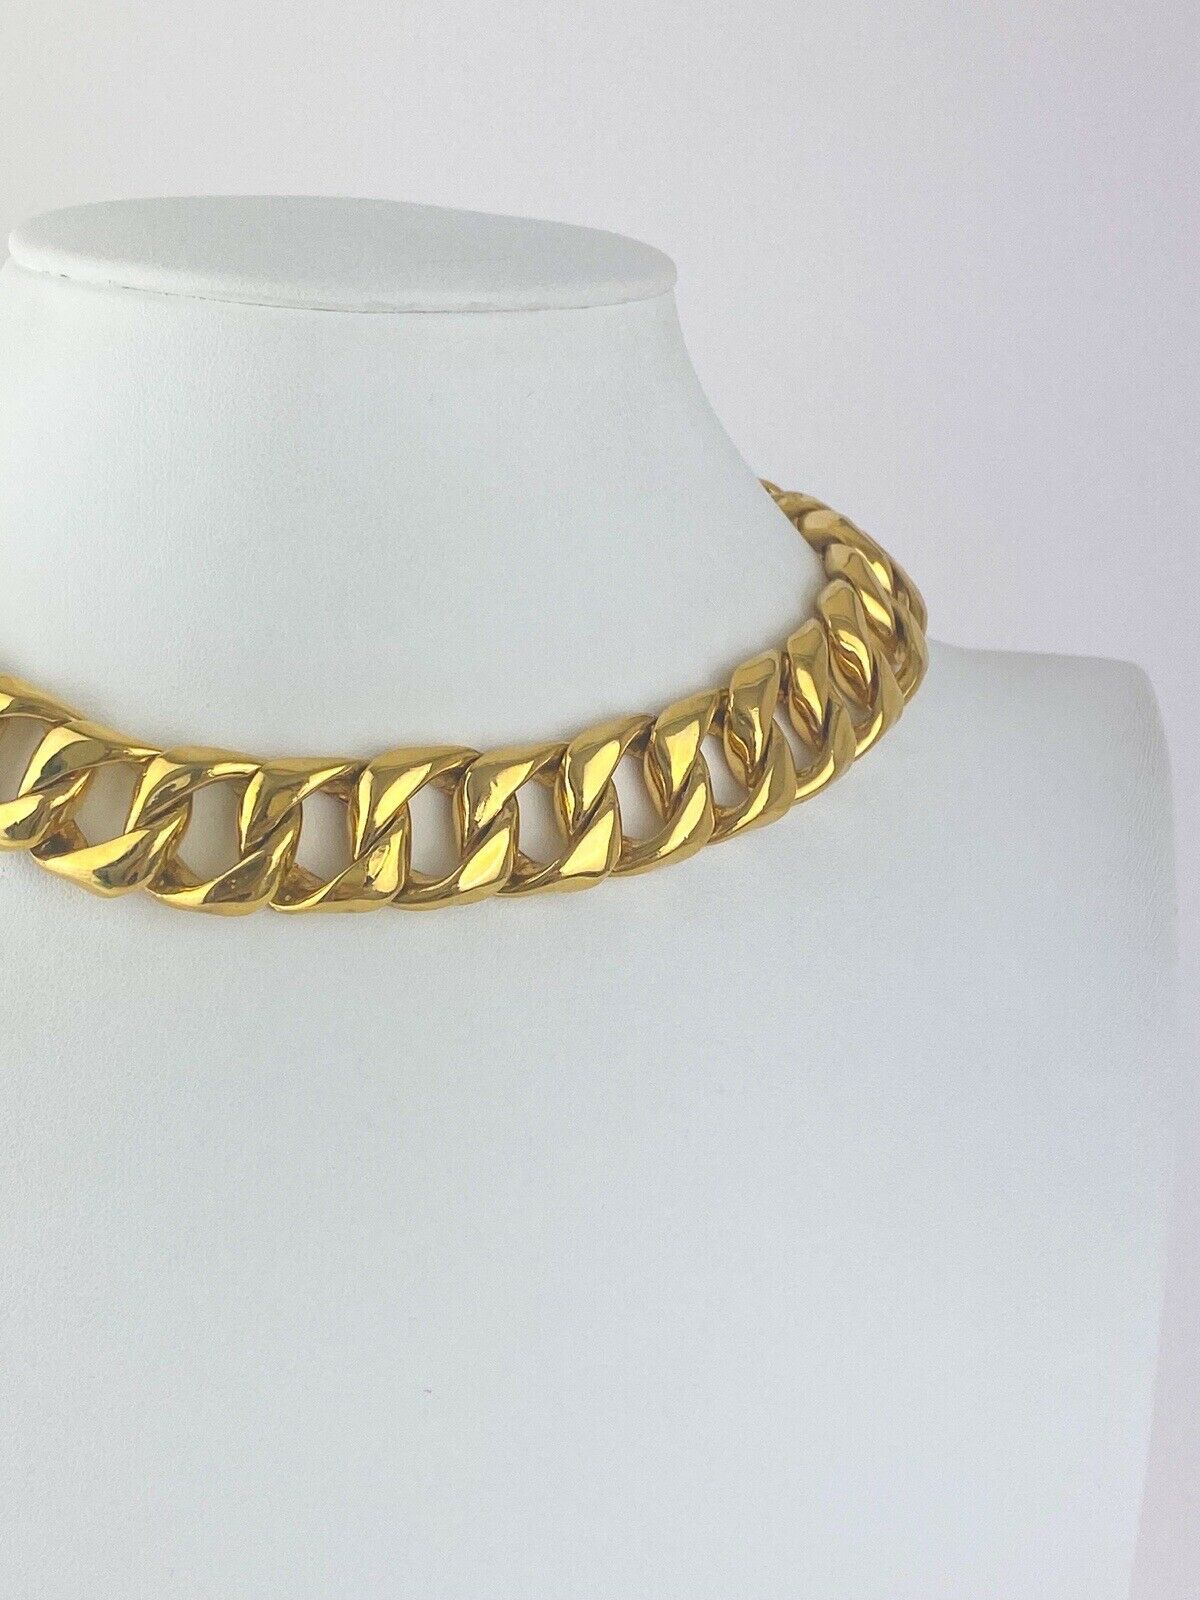 【SOLD OUT】YSL Yves Saint Laurent Vintage Gold Tone Chain Link Choker Necklace